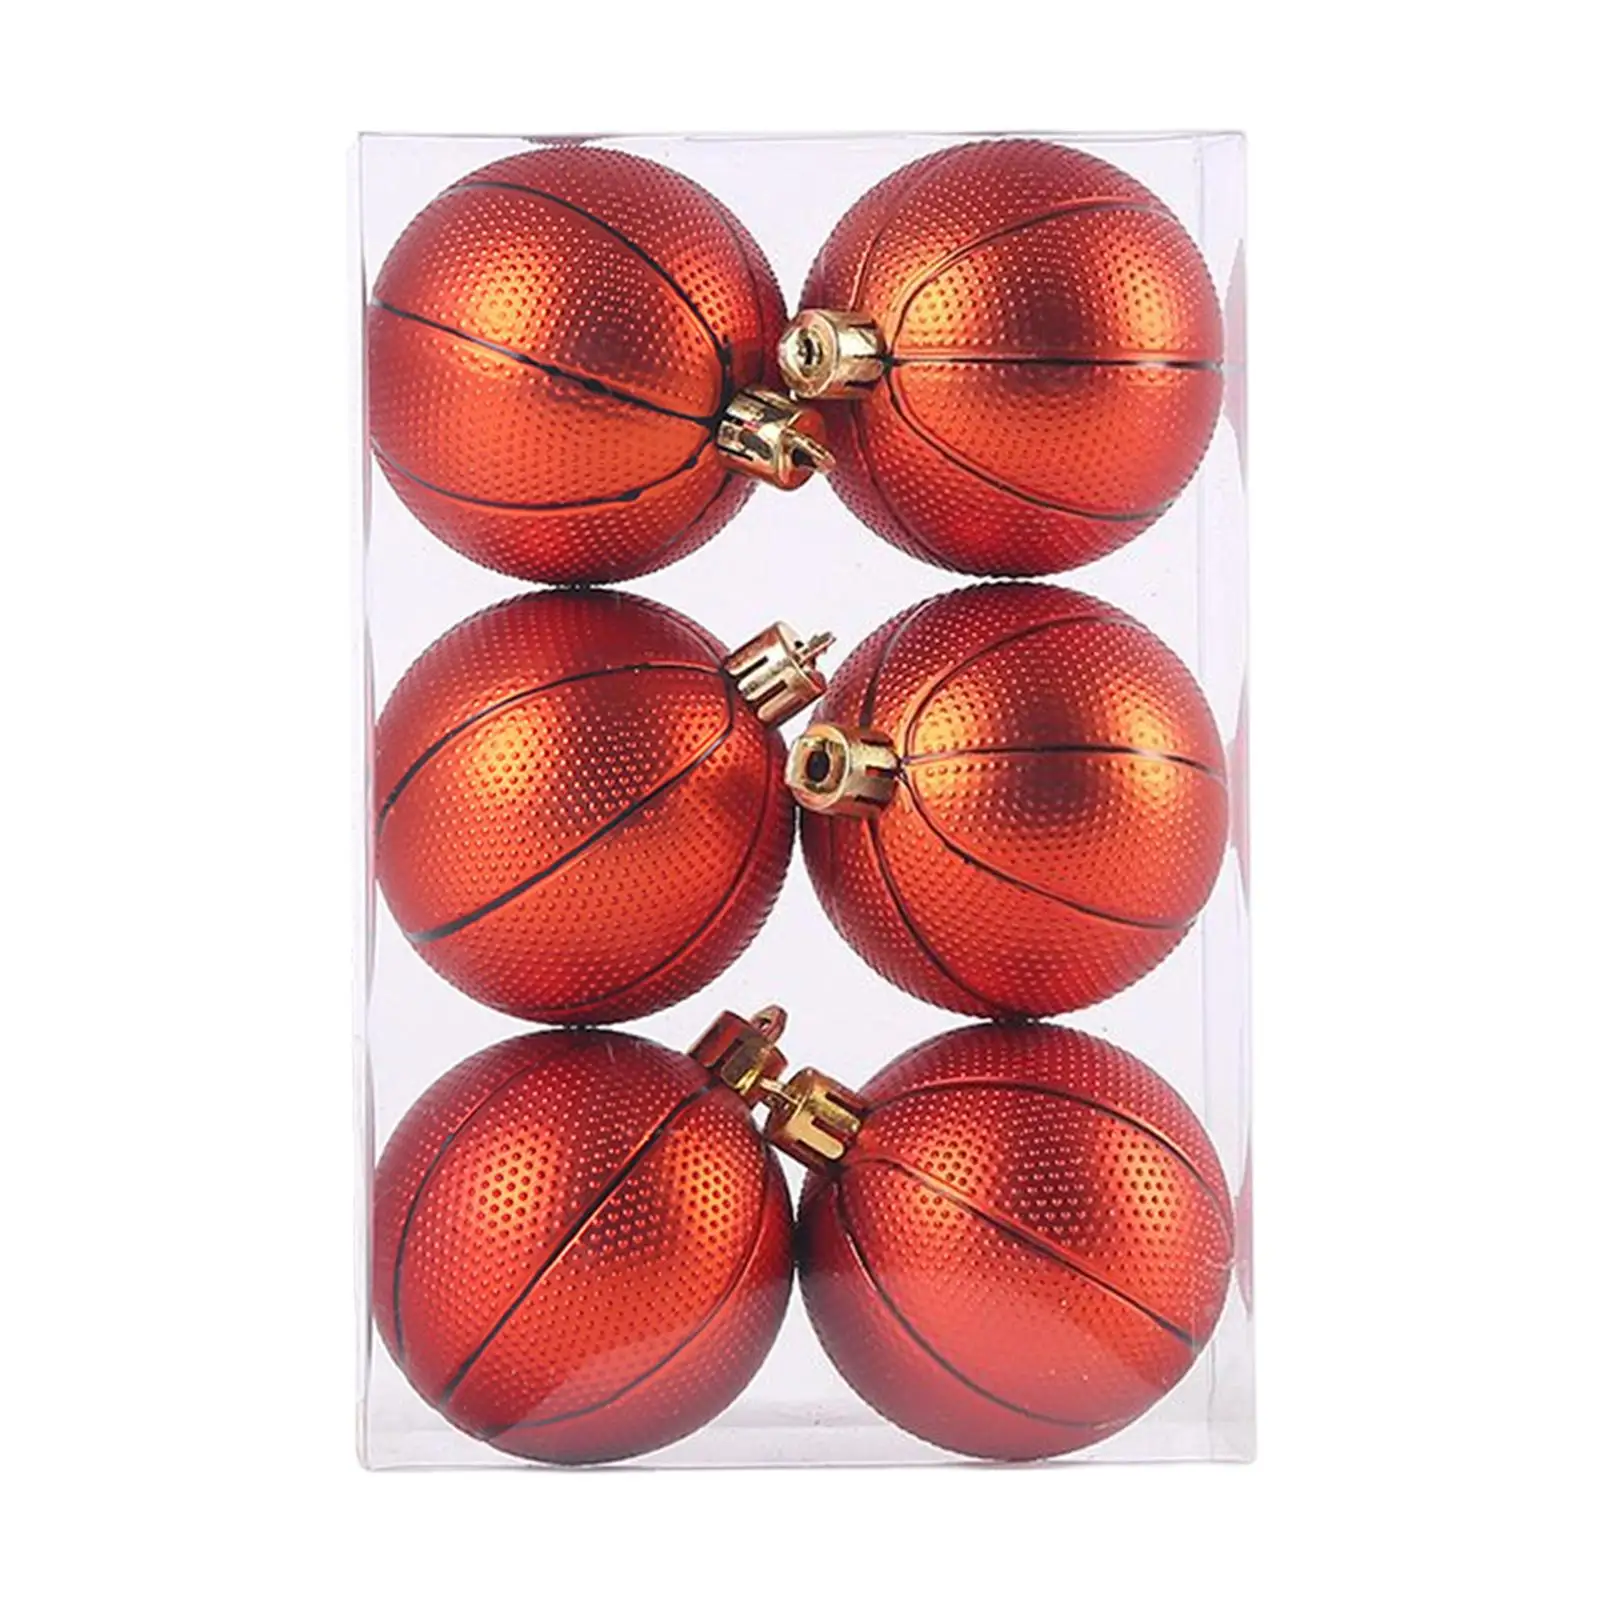 6Pcs Hanging Christmas Ball Ornaments Tree Xmas DIY Shatterproof Decorative Decorations Engagement Anniversary Indoor Home Party